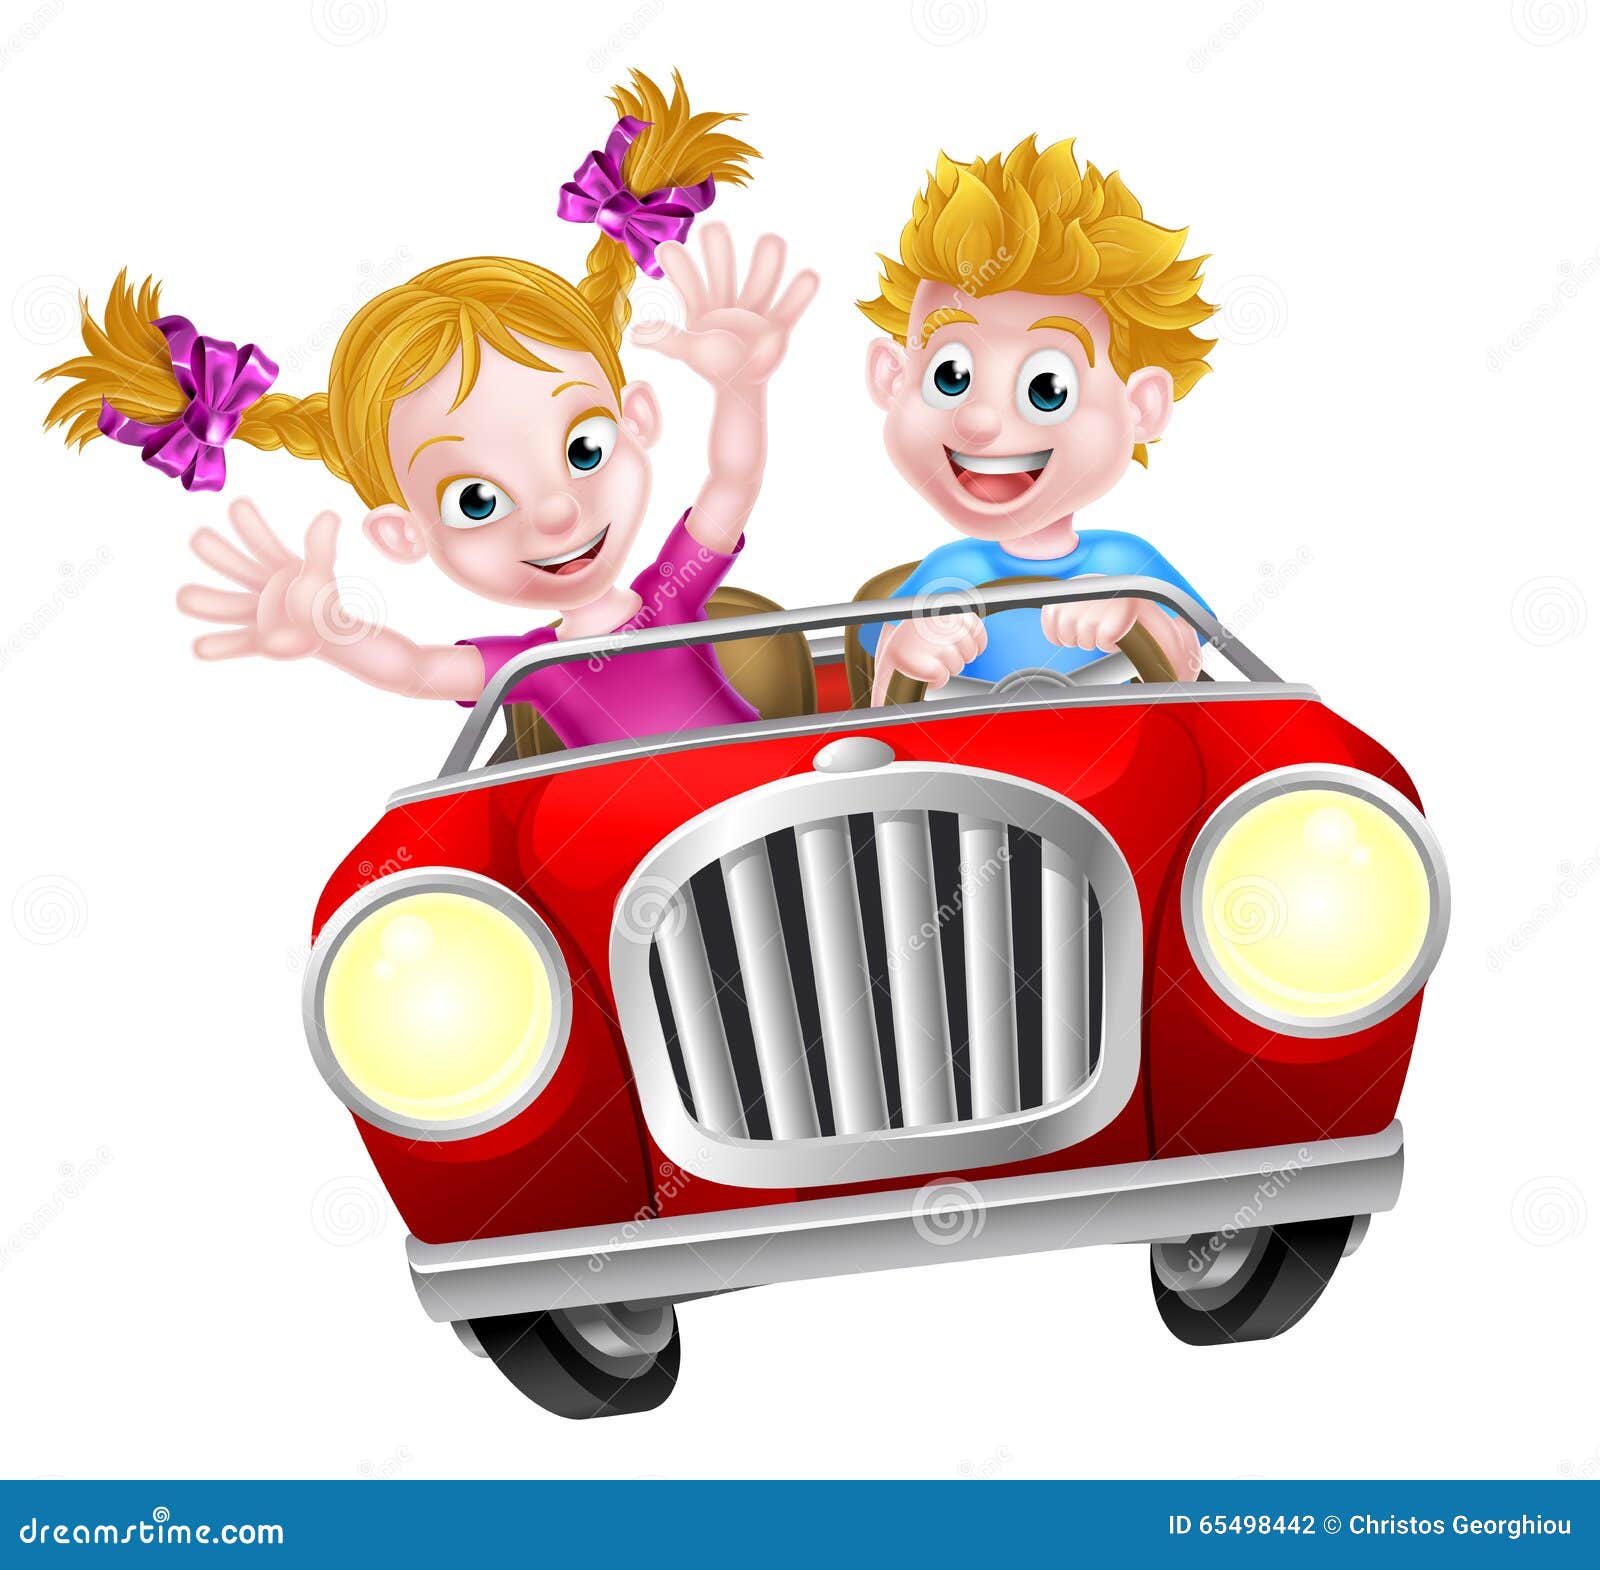 clipart of girl driving car - photo #48